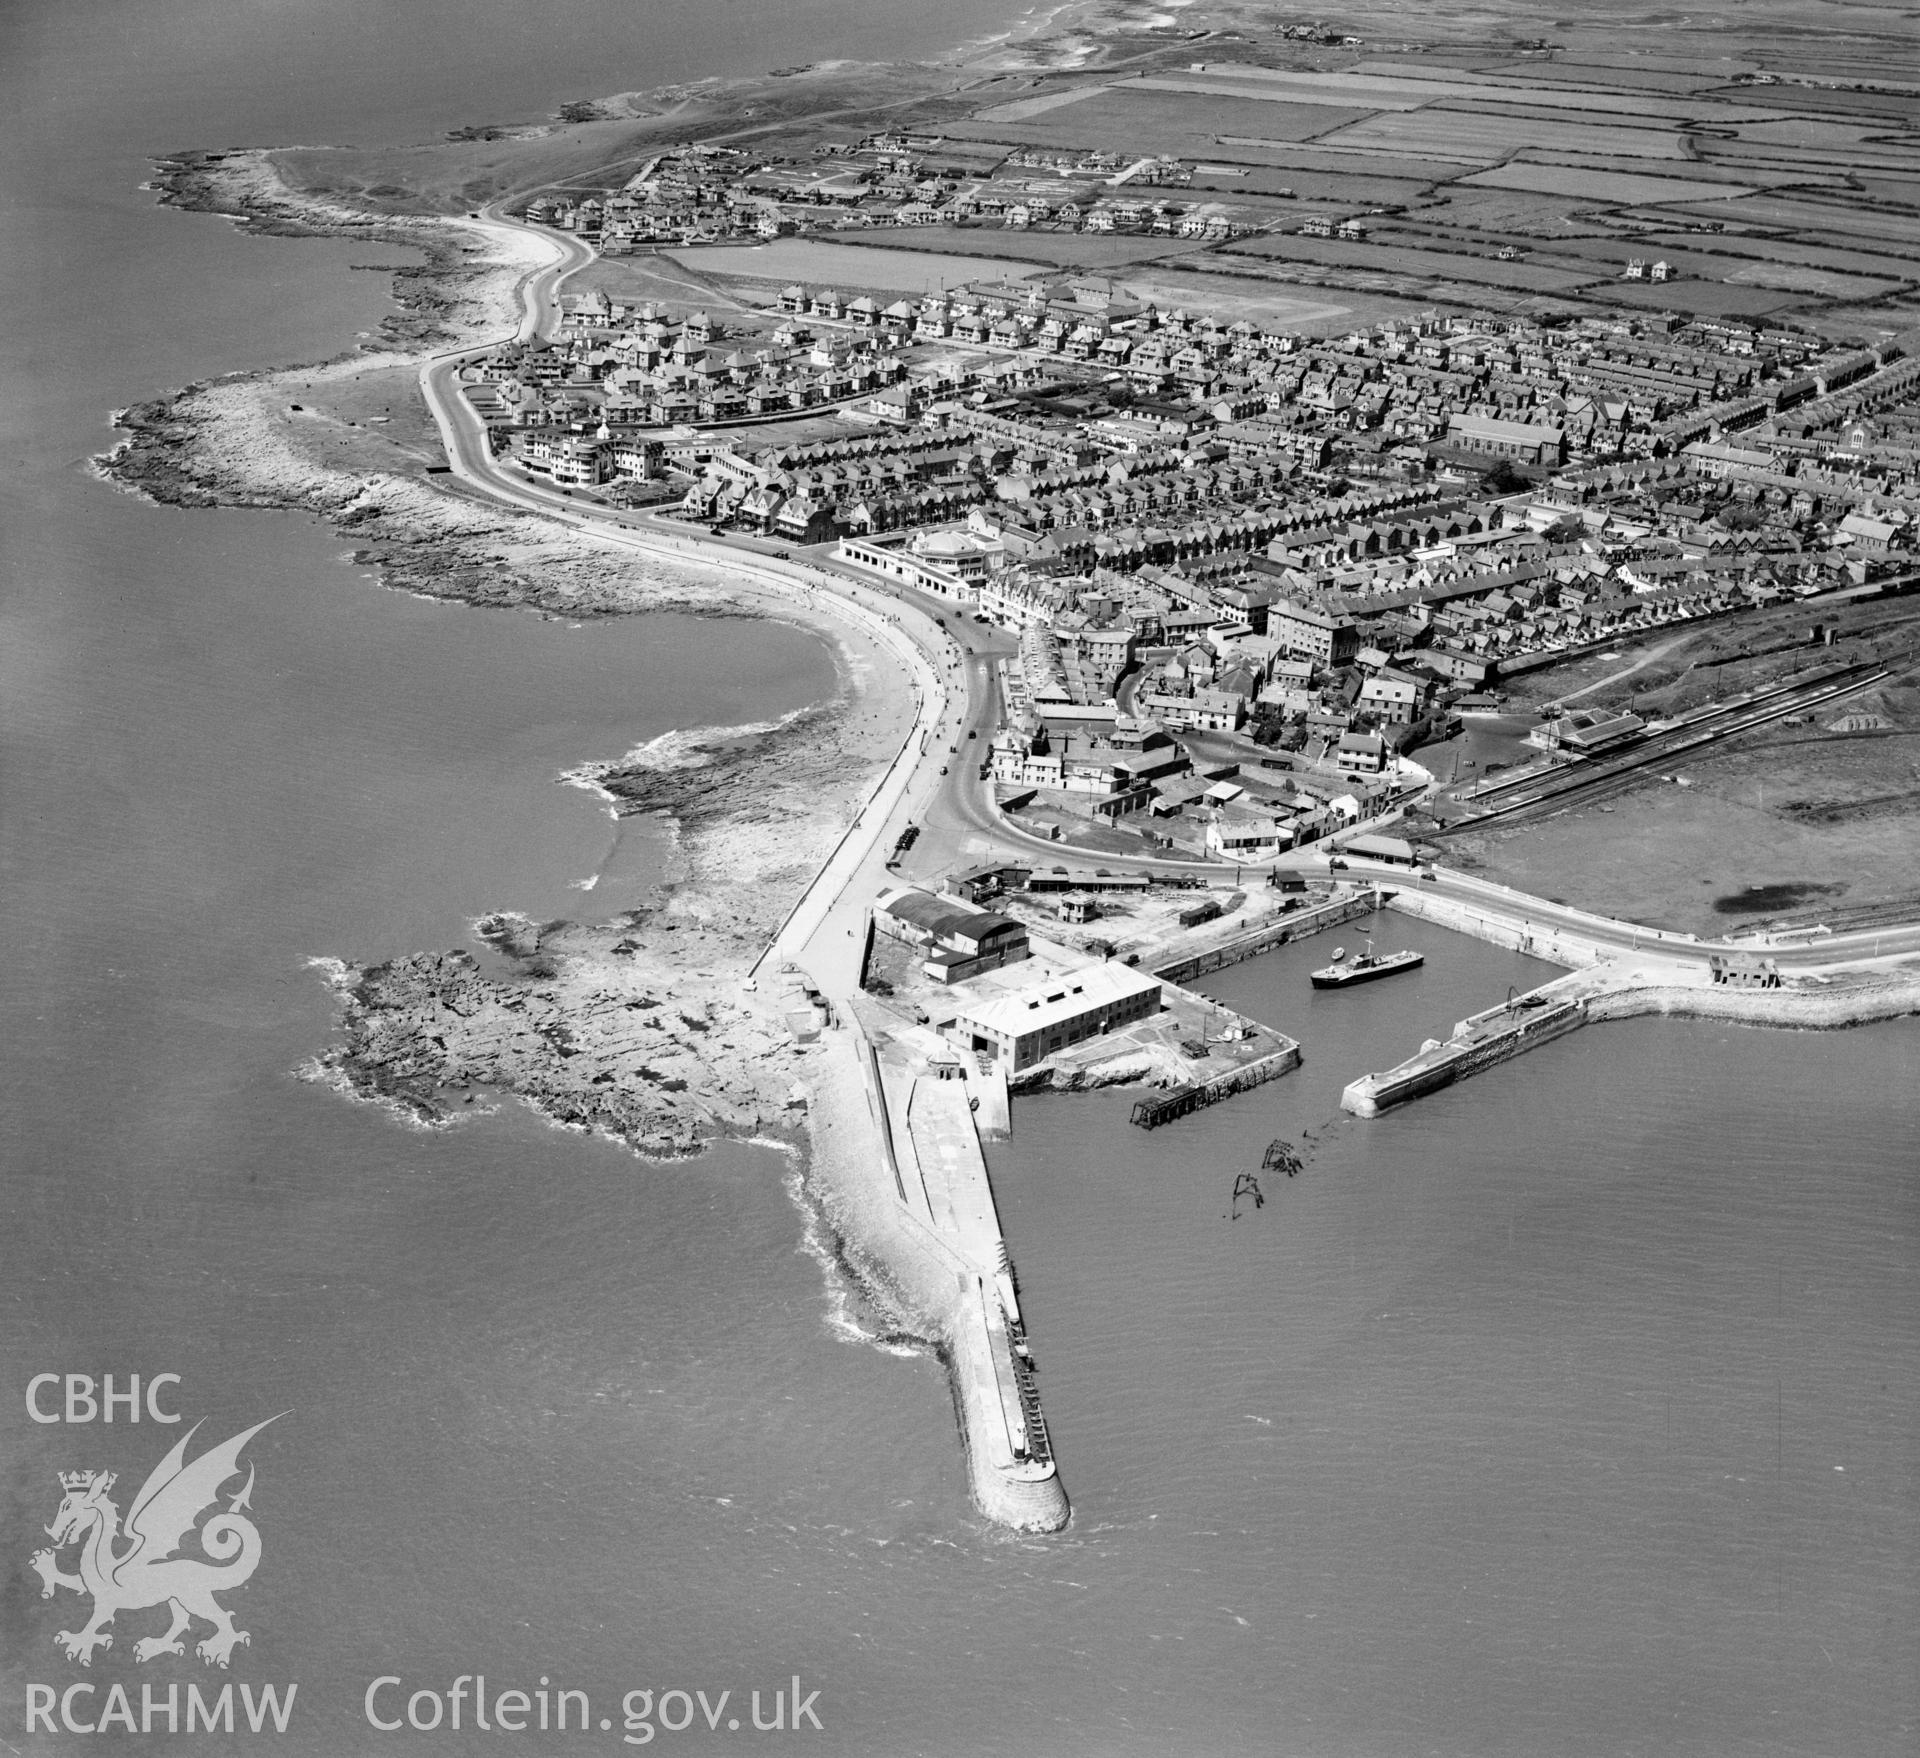 View of Porthcawl showing town, including harbour, Grand Pavilion, Esplanade, railway and cinema. Oblique aerial photograph, 5?" cut roll film.